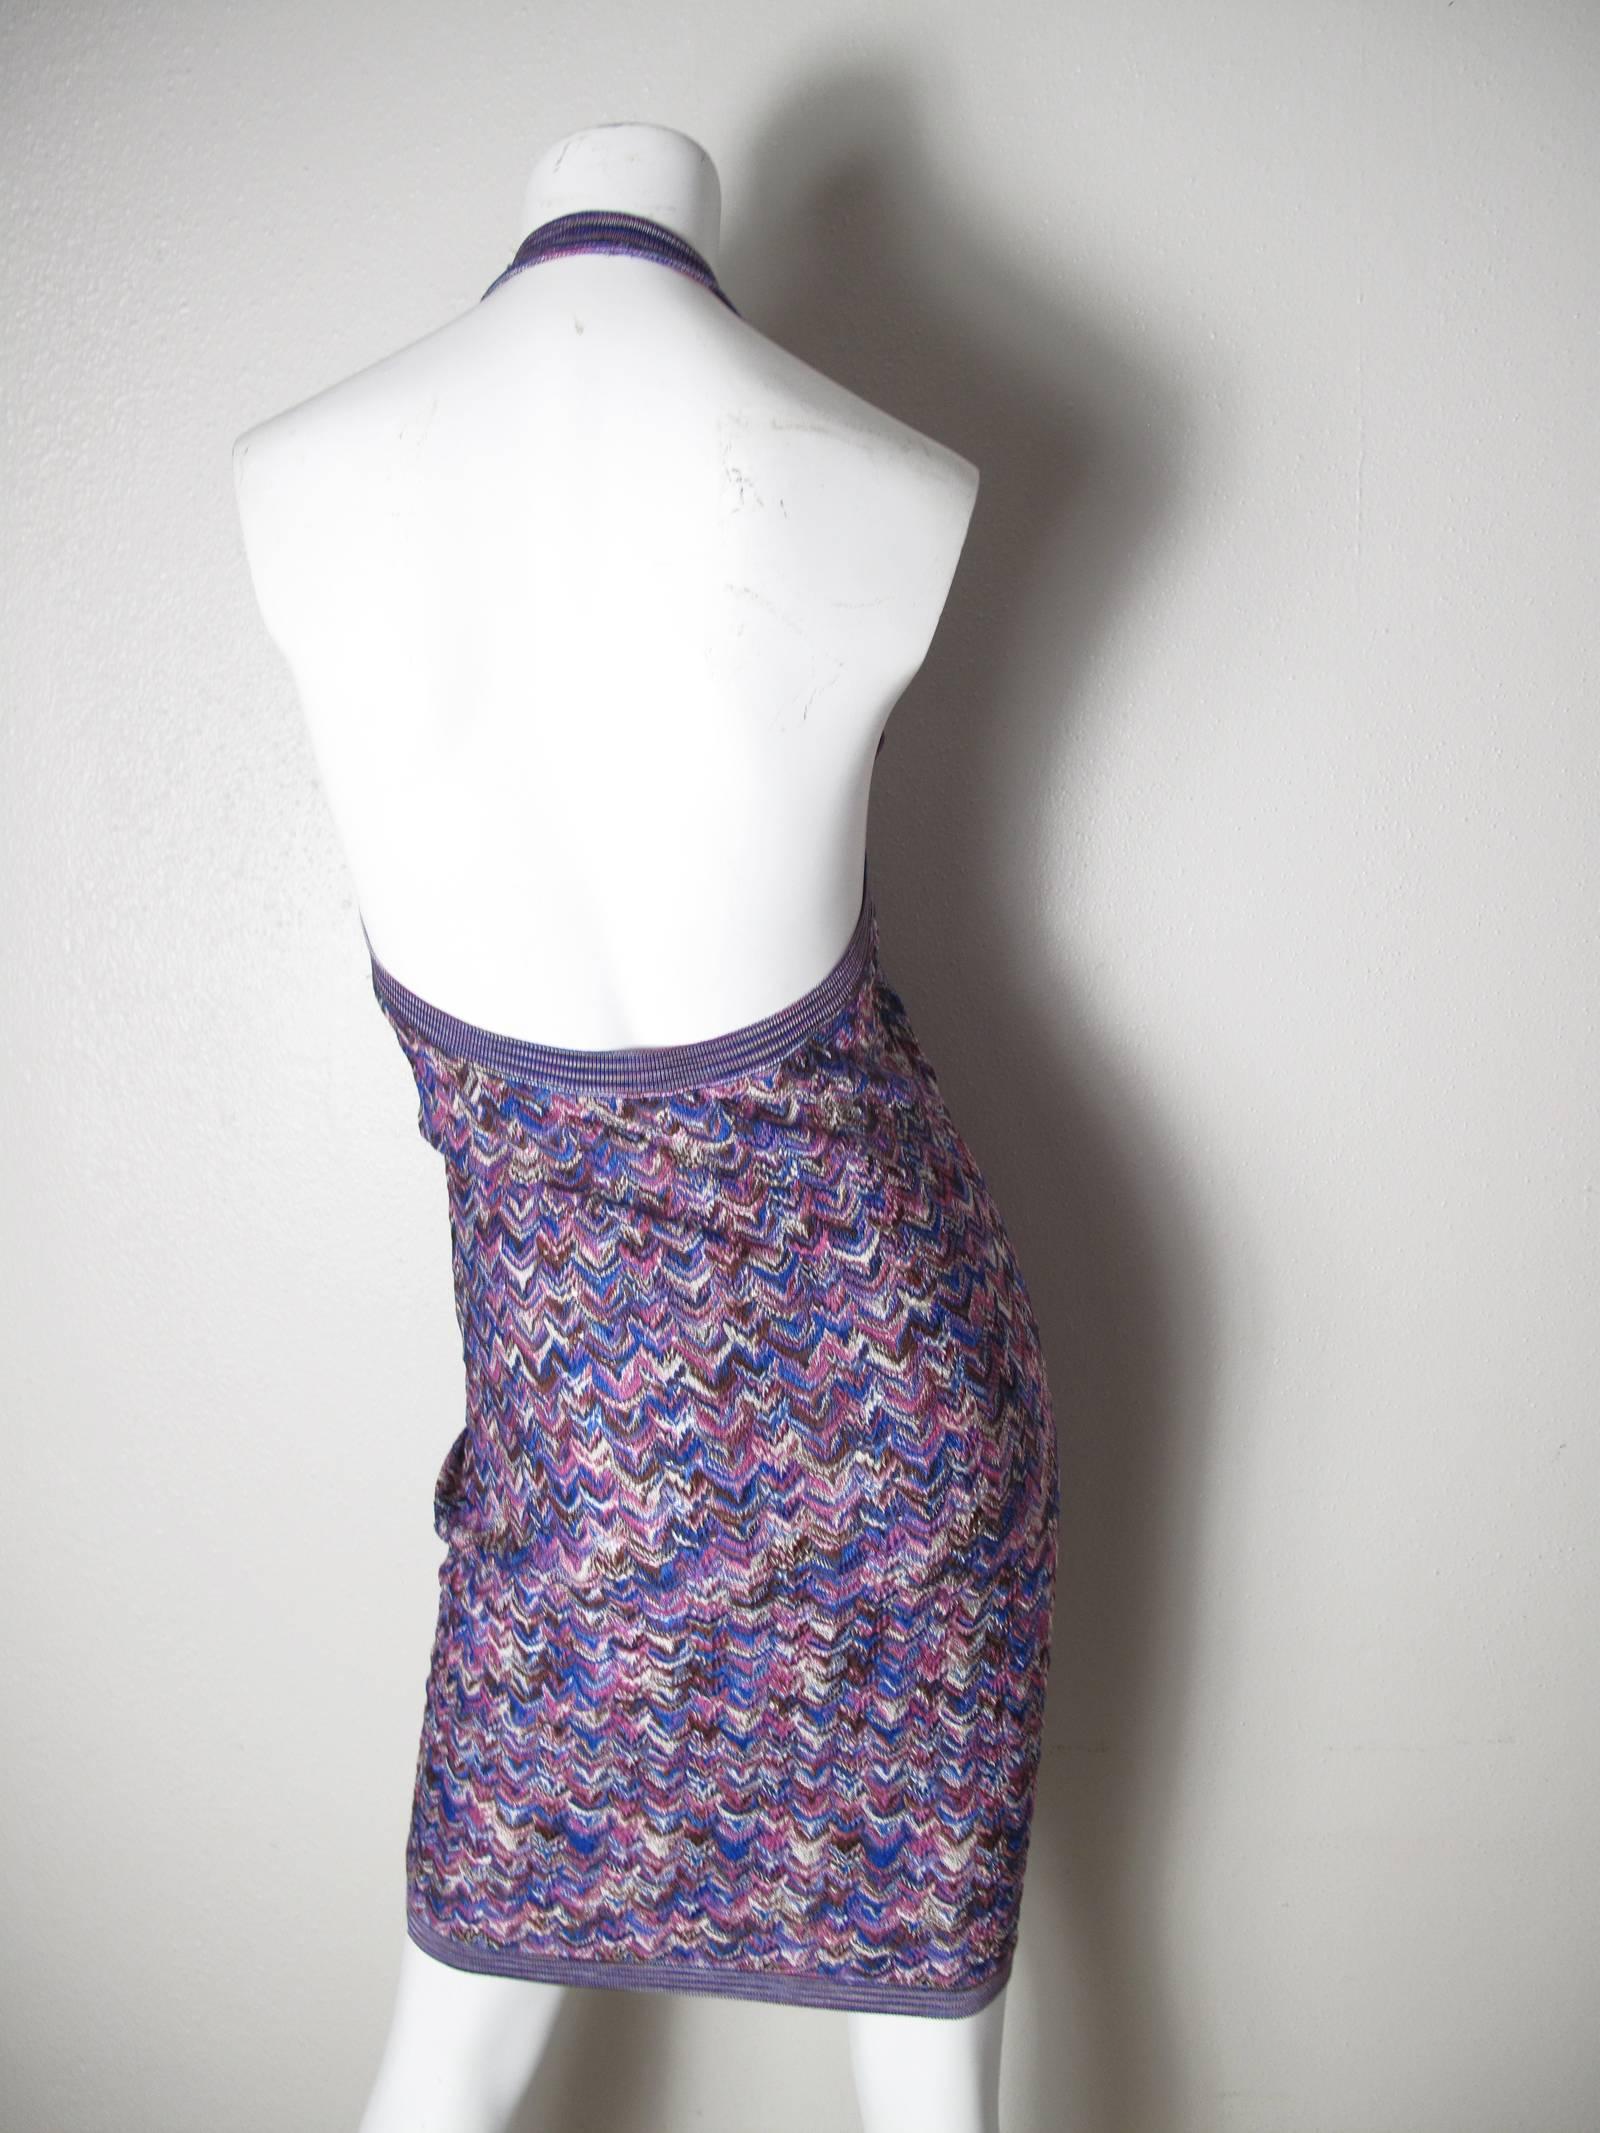 1970s Missoni rayon knit halter dress. Condition: Excellent. Size 42

We accept returns for refund, please see our terms.  We offer free ground shipping within the US.  Please let us know if you have any questions. 